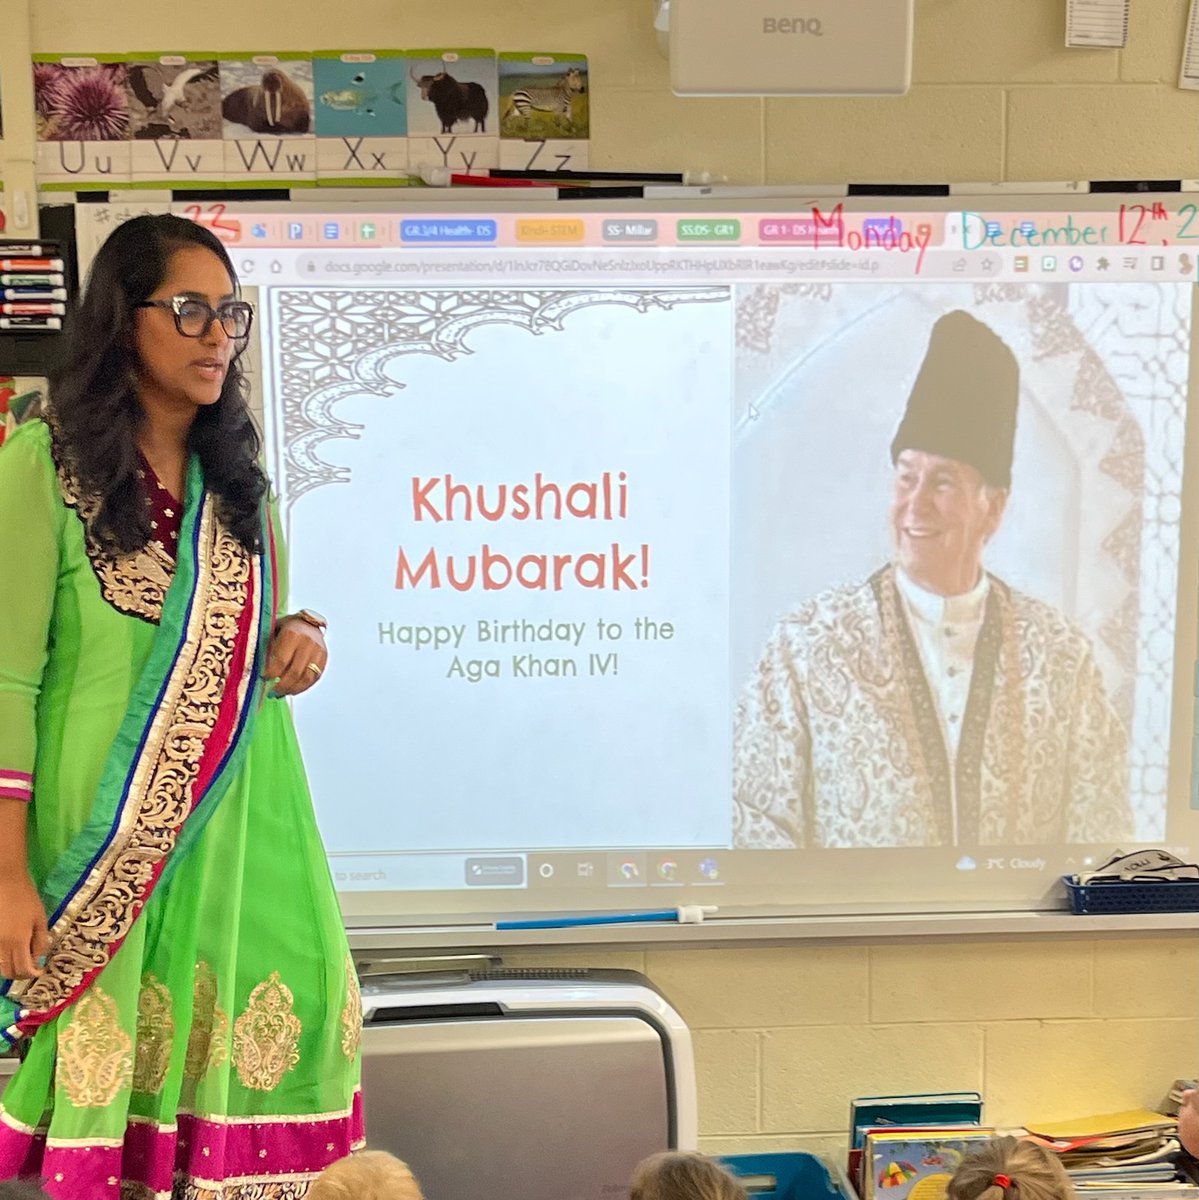 Thank you @AmrinaDawson for teaching us about Khushali Mubarak and including us in your celebration! We will add your celebration to our interactive winter holidays display.
 #celebratingtogether  #learningtogether #inclusive @AndrewHunterES @MrsAMacDonald @SCDSB_Schools @SCDSBey